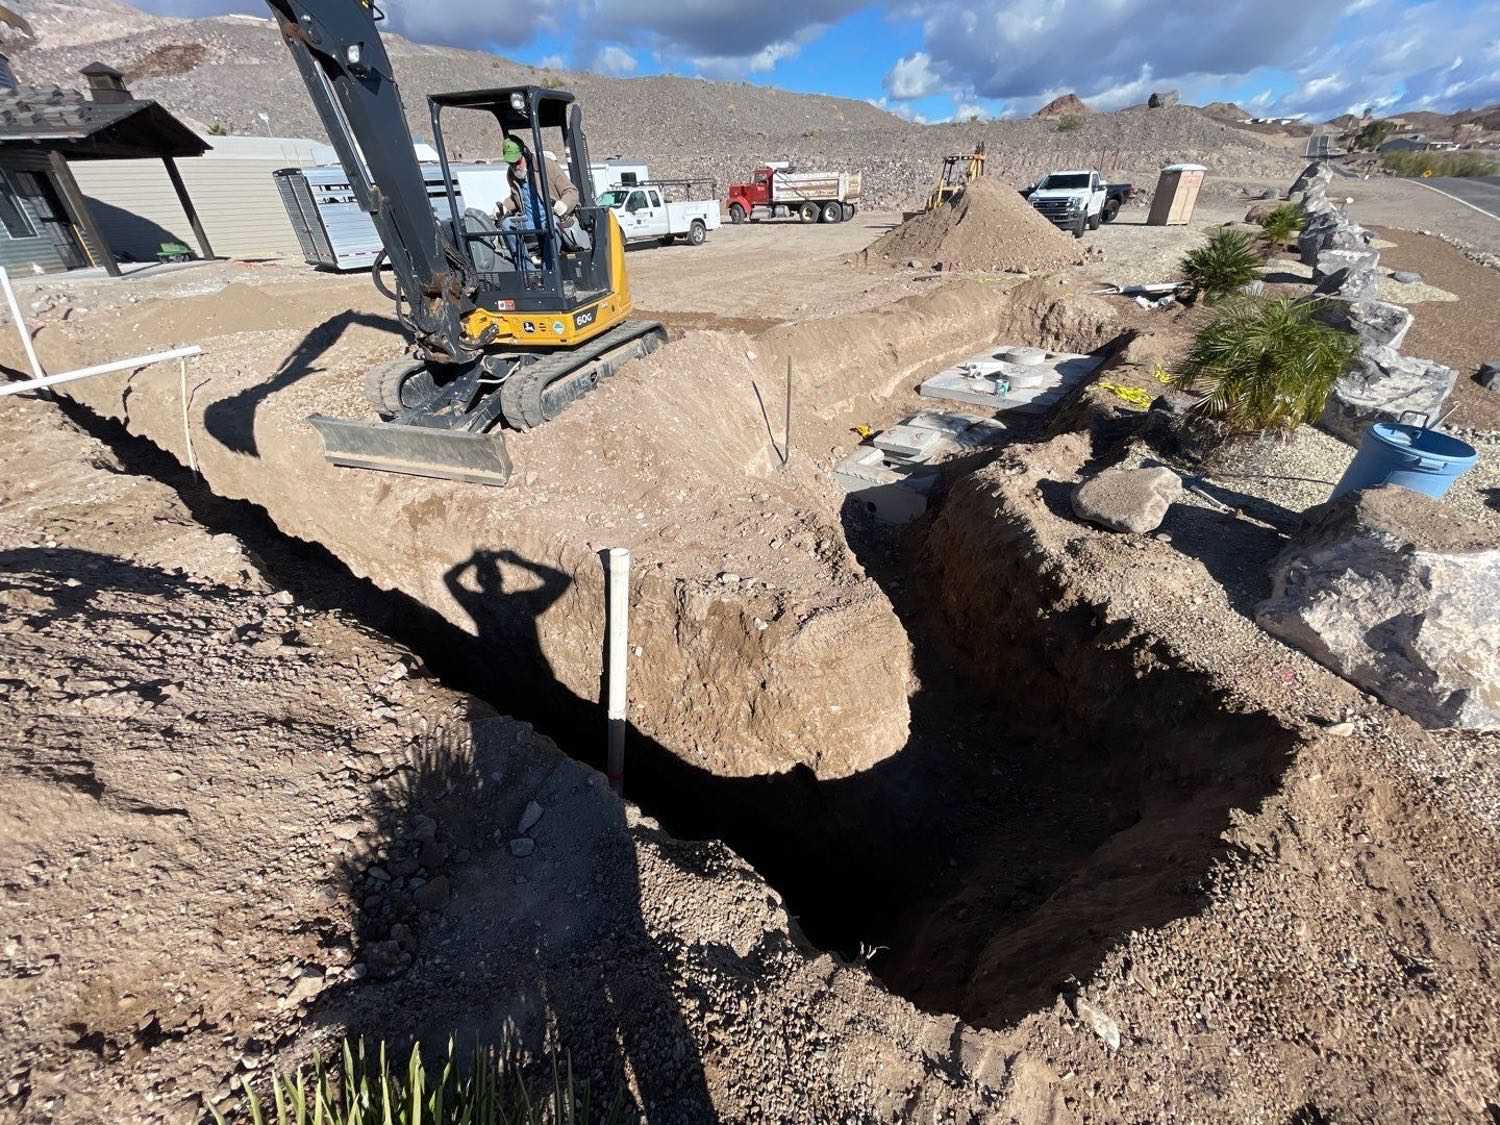 Septic Tank Replacement